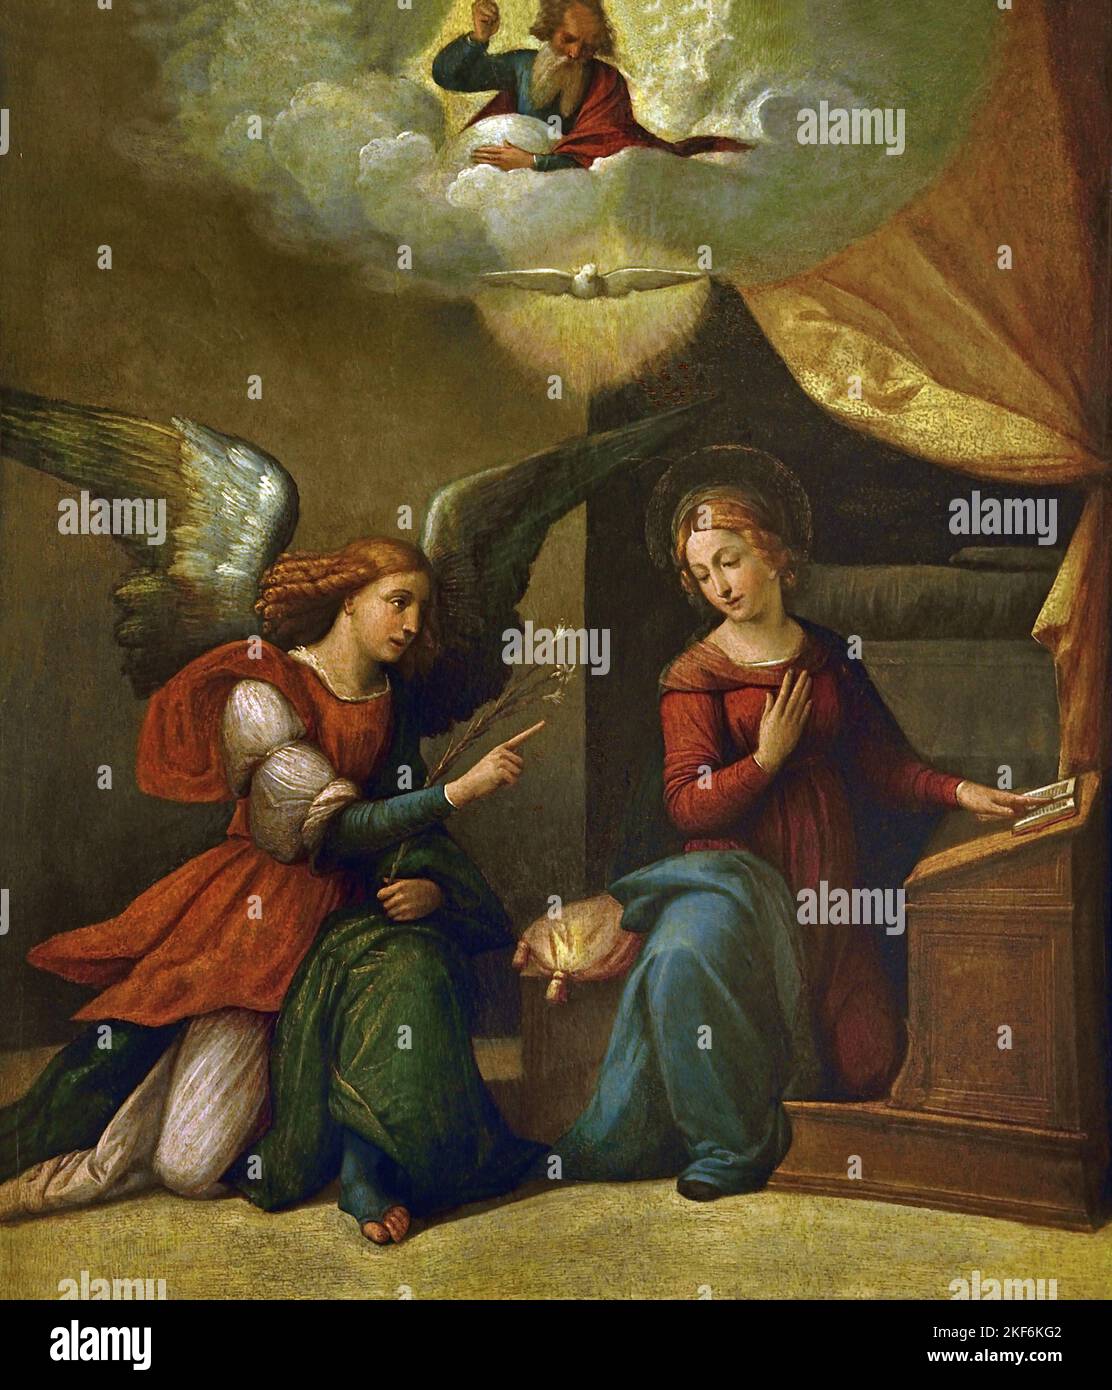 Annunciation - oil on panel 1520 - 1530, Garofalo workshop Garofalo - Benvenuto Tisi (or Il Garofalo) (1481 – 1559 Italy Italian Annunciation ,represents the biblical story, in which, Archangel Gabriel, announces to the ,Virgin Mary, that she has been chosen to be the, mother of Jesus, birth of Christ, Stock Photo